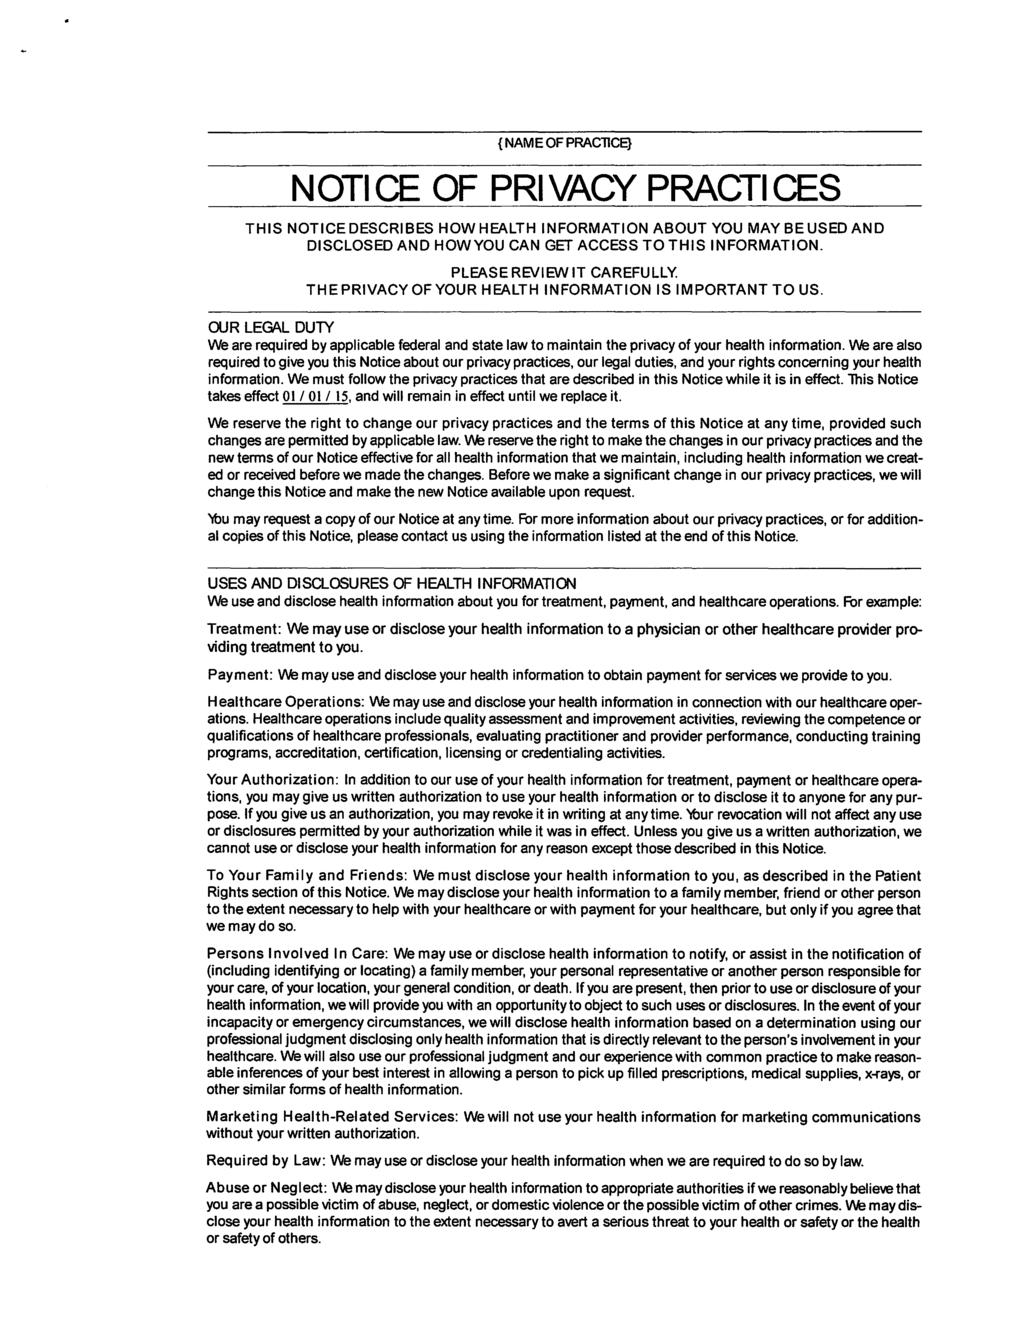 { NAME OF PRACllCE} NOTICE OF PRIVACY PRACTICES THIS NOTICE DESCRIBES HOW HEALTH INFORMATION ABOUT YOU MAY BE USED AND DISCLOSED AND HOW YOU CAN GET ACCESS TO THIS INFORMATION.